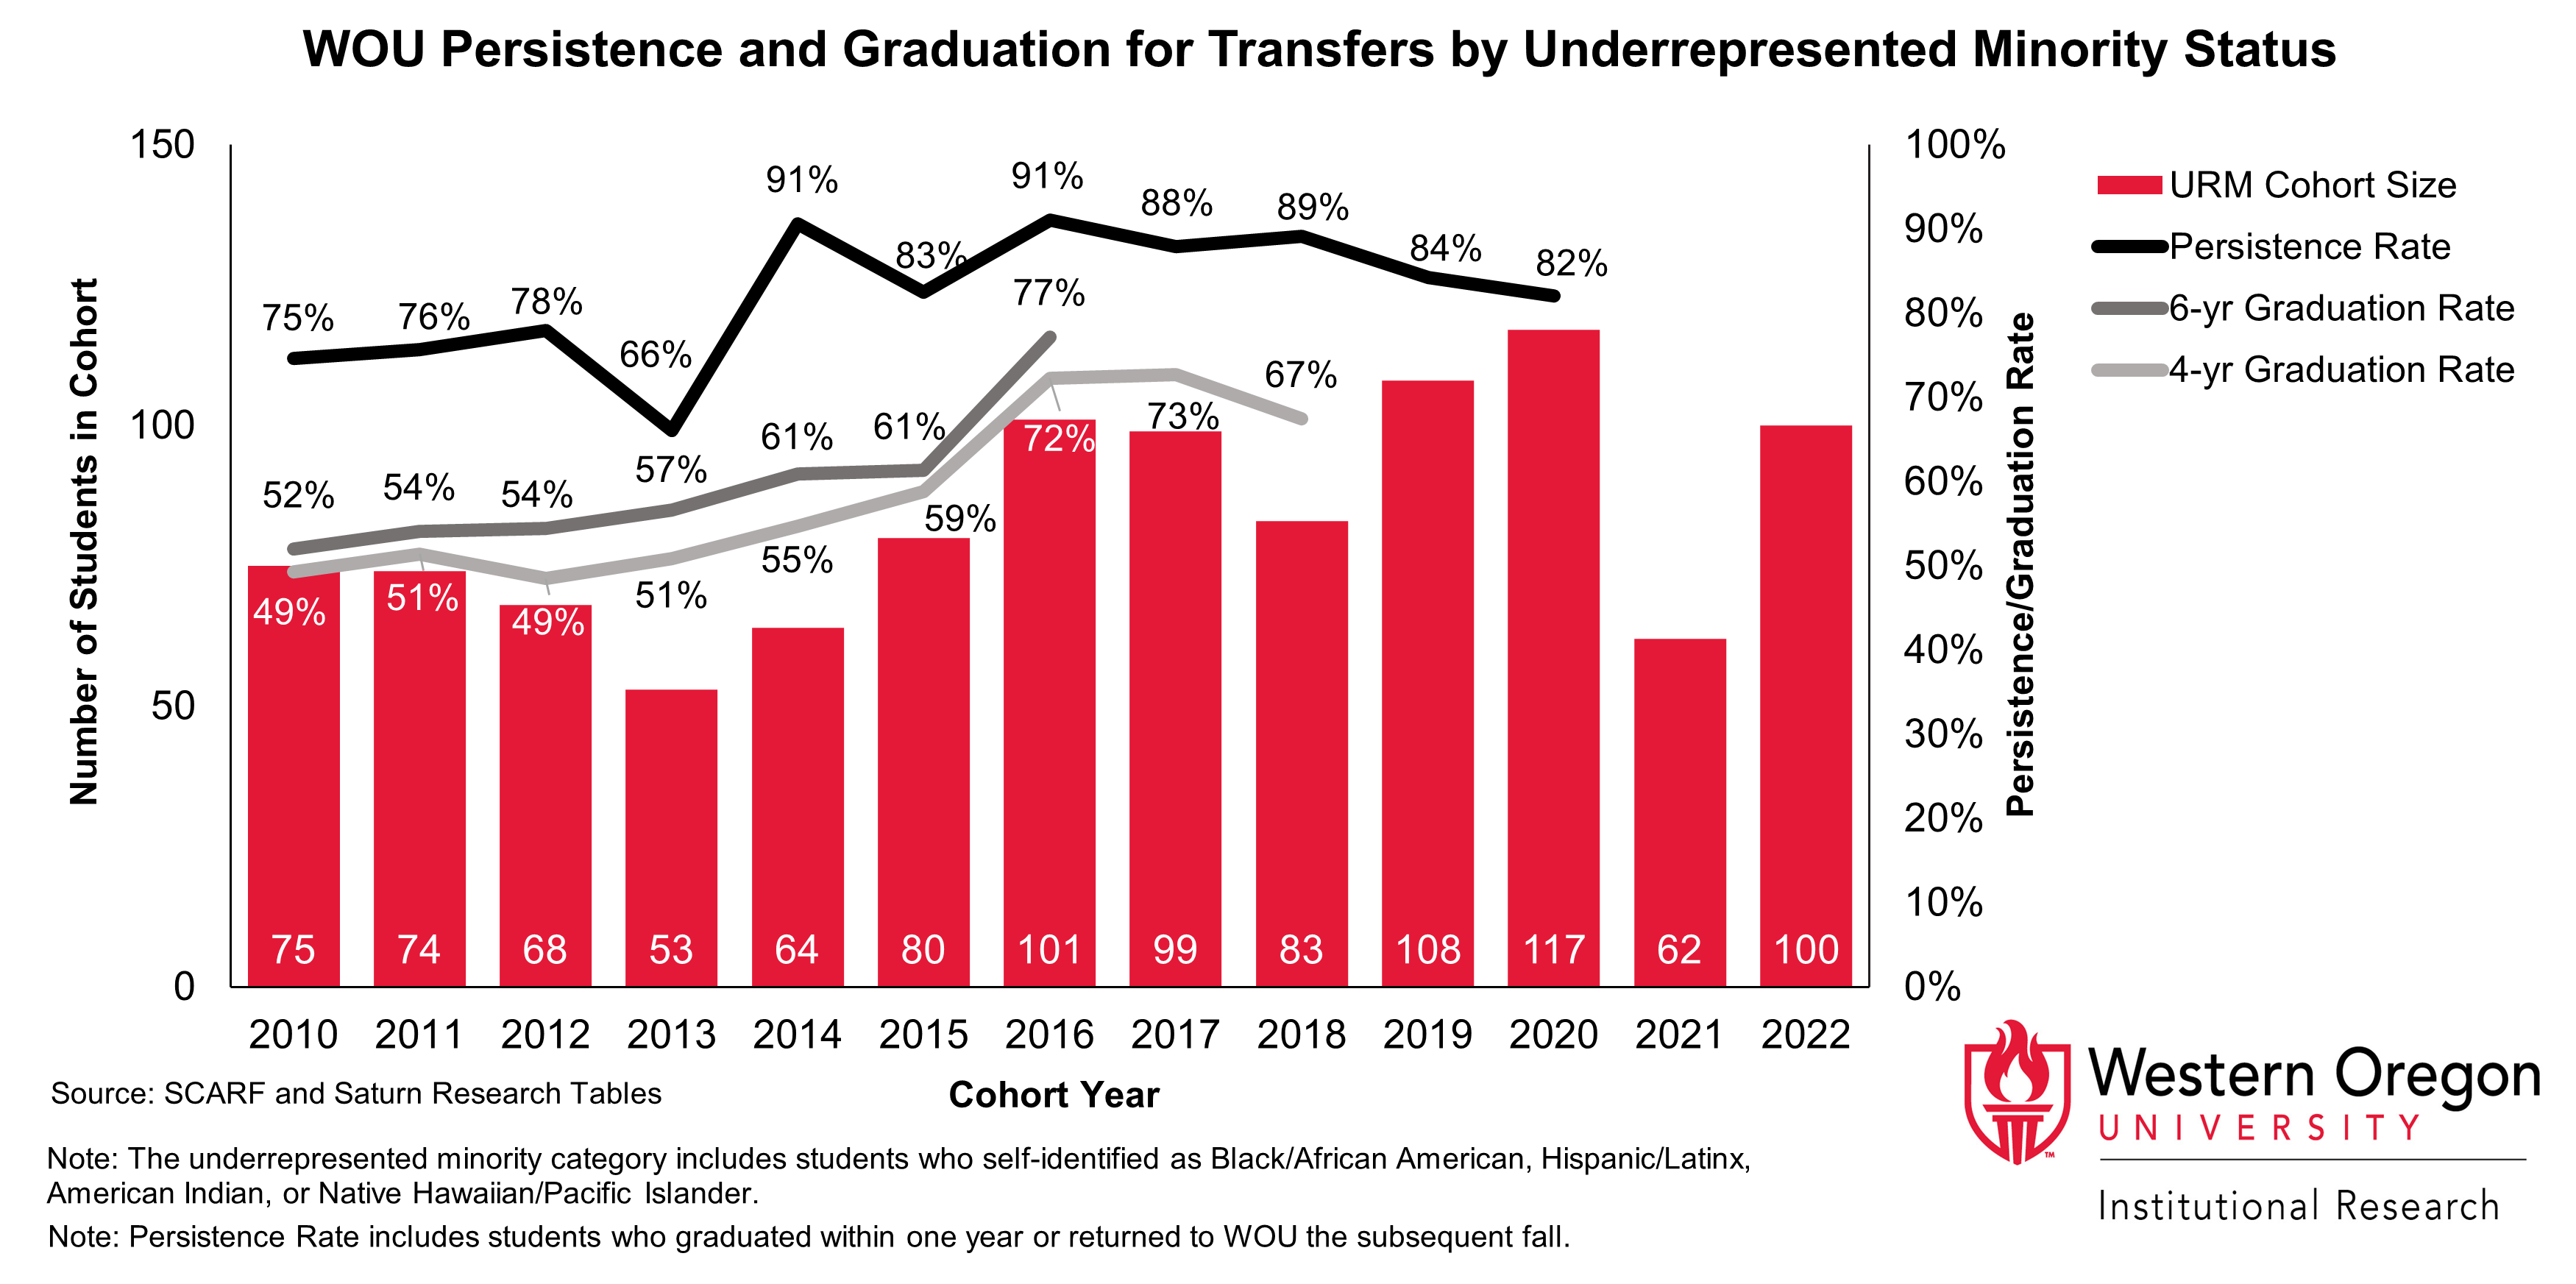 Bar and line graph of retention and 4- and 6-year graduation rates since 2010 for WOU transfer students from underrepresented minority groups, showing that graduation rates have been steadily increasing while retention rates have remained largely stable